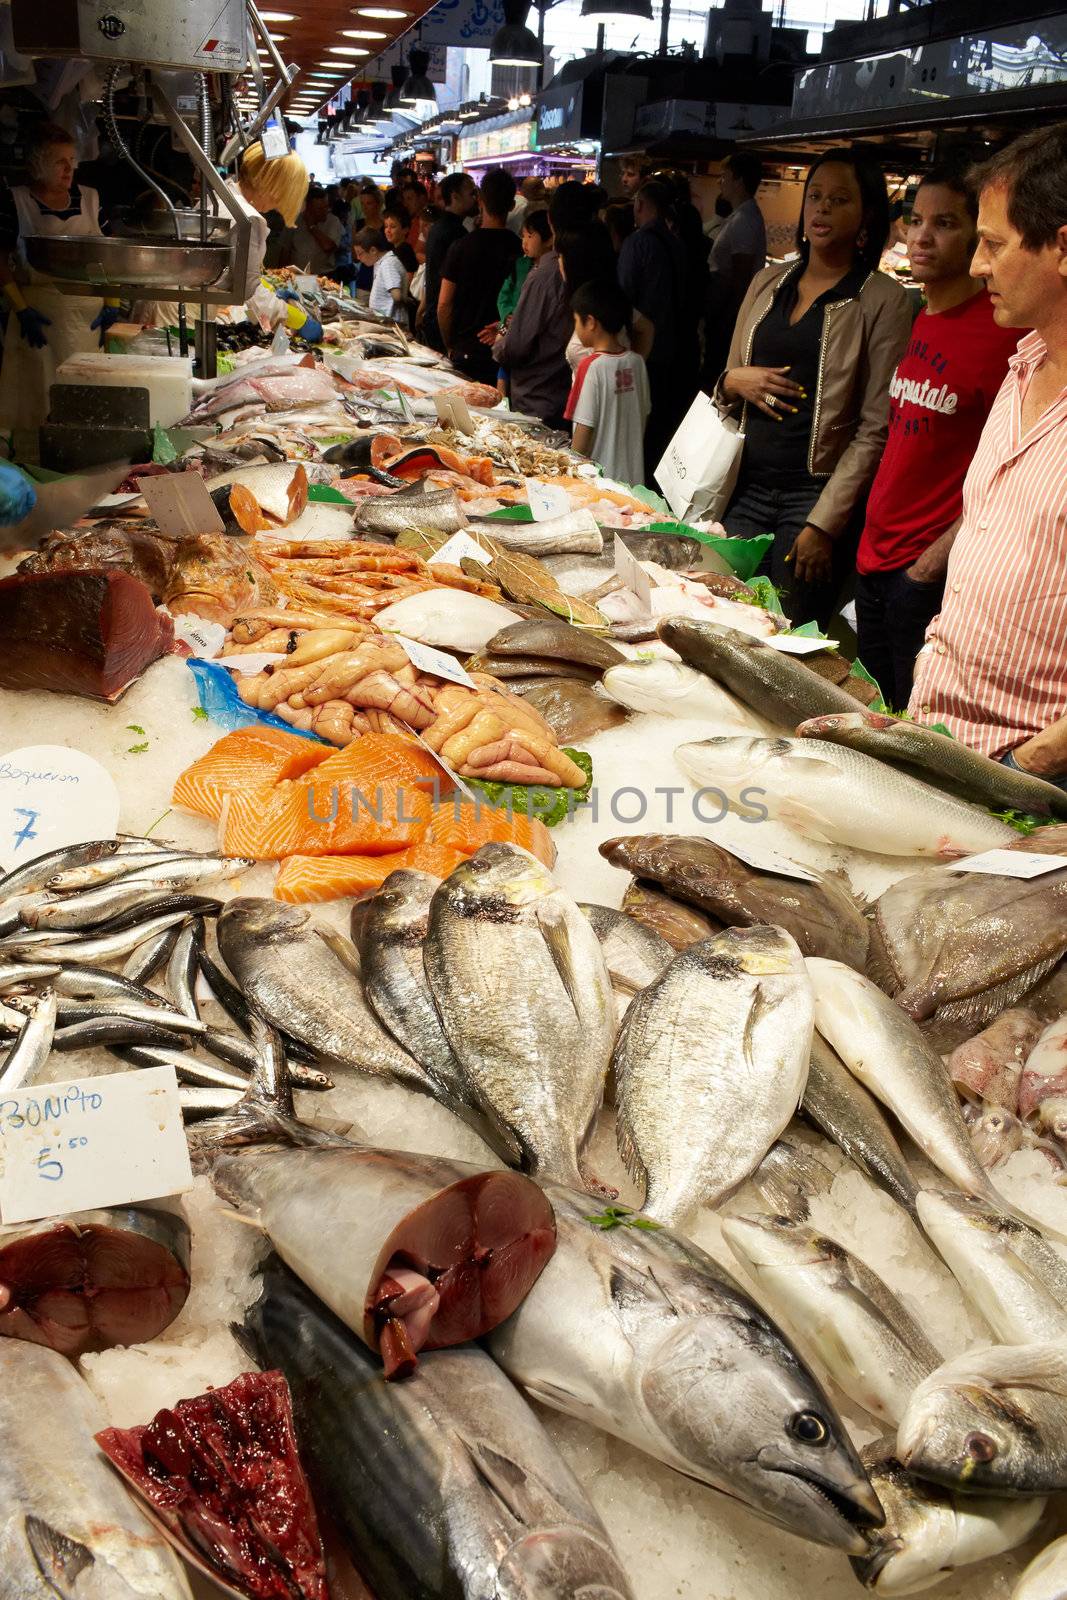 BARCELONA - MAY 26: The buyers of fish at the market on May, 26, 2012 in Barcelona, Spain.